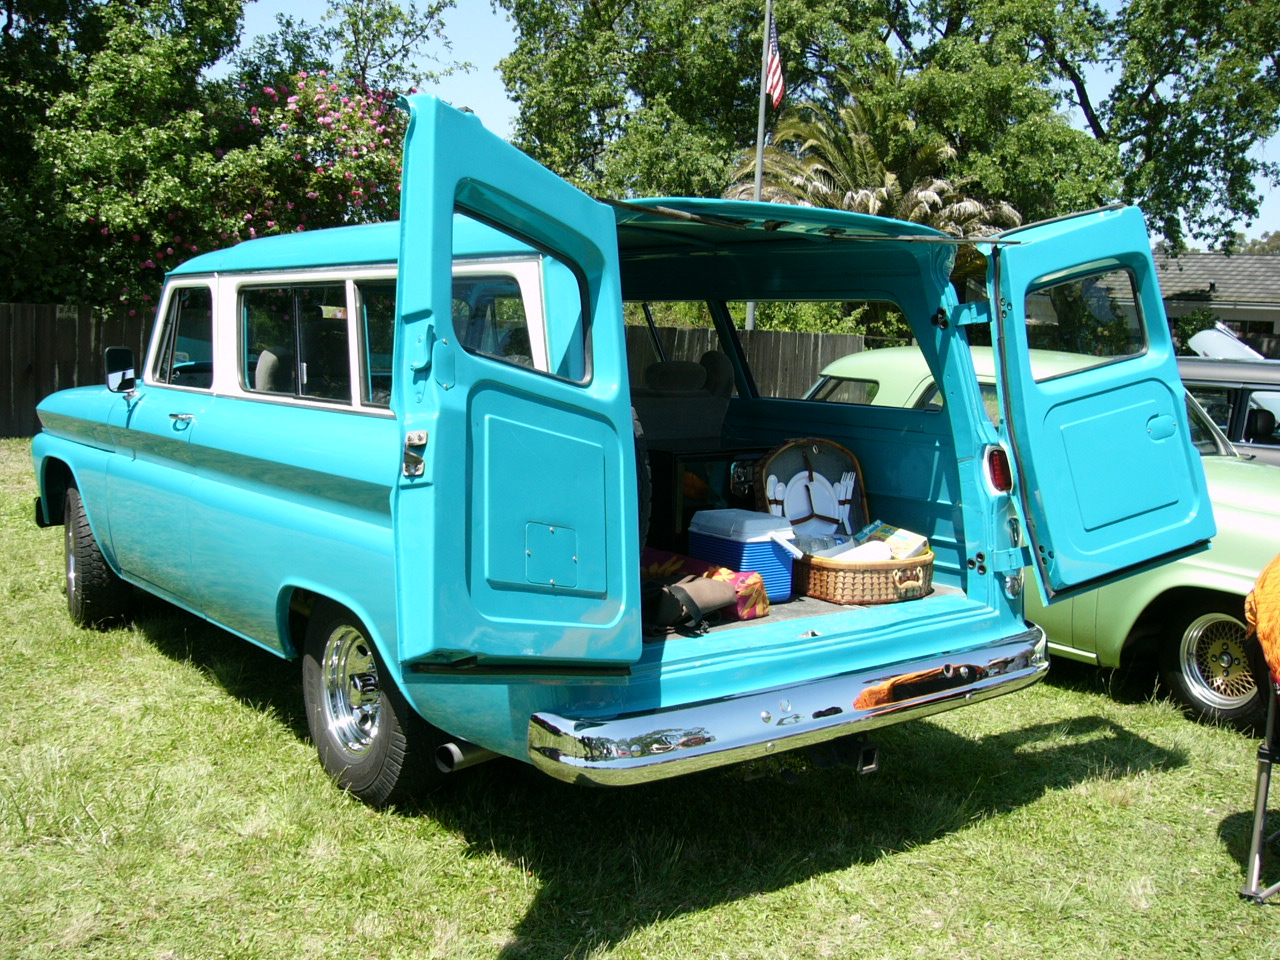 1965 Gmc carryall for sale